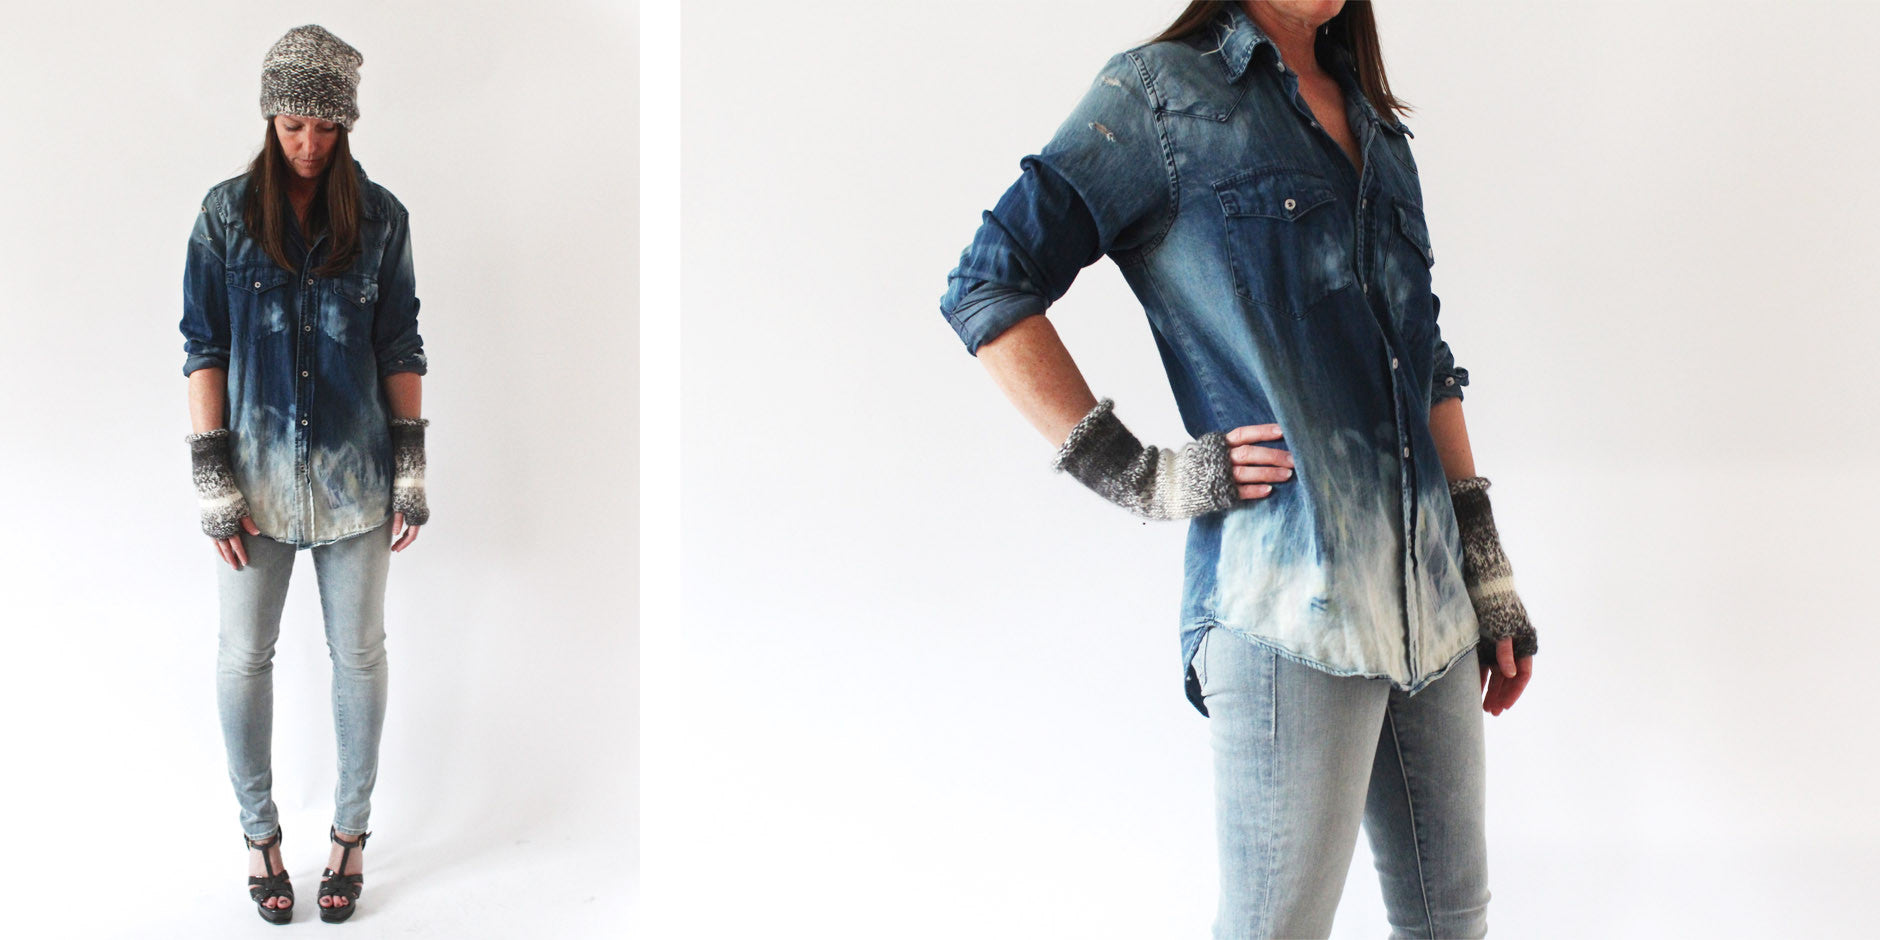 the looker jean - clear as day/nsf destroyed denim shirt/anna kula hat and gloves